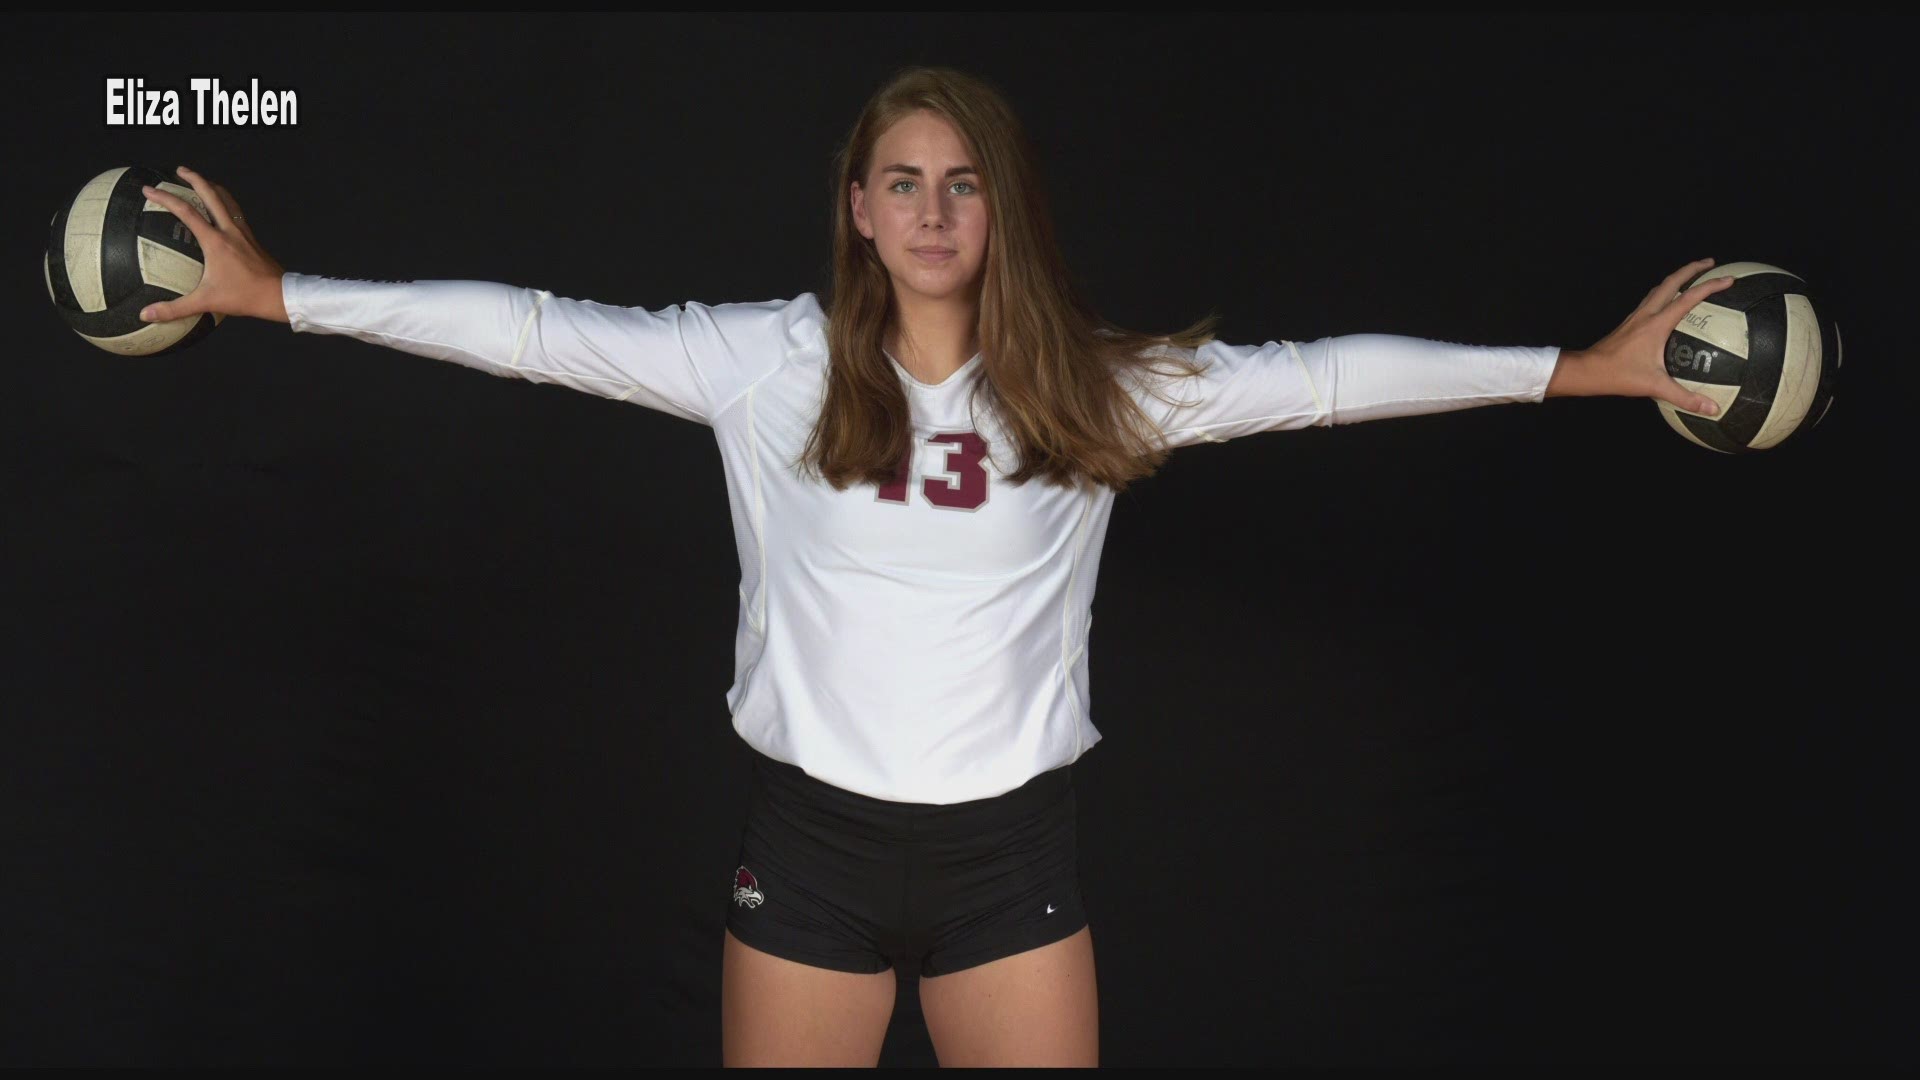 The Forest Hills Eastern volleyball star has a passion for faith, school and sports